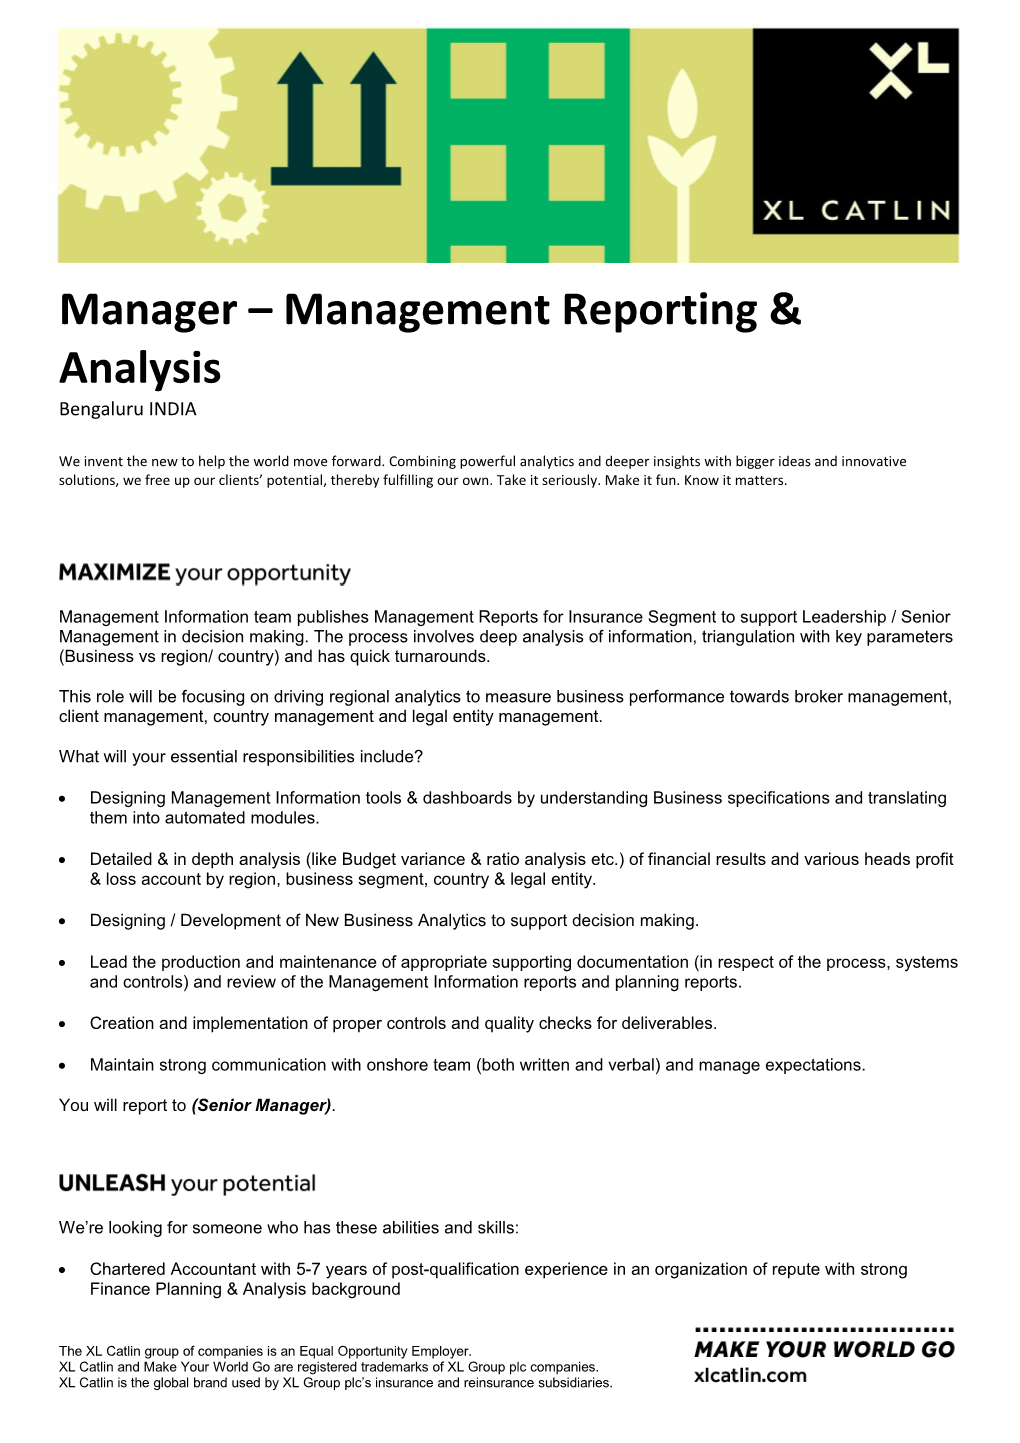 Manager Management Reporting & Analysis